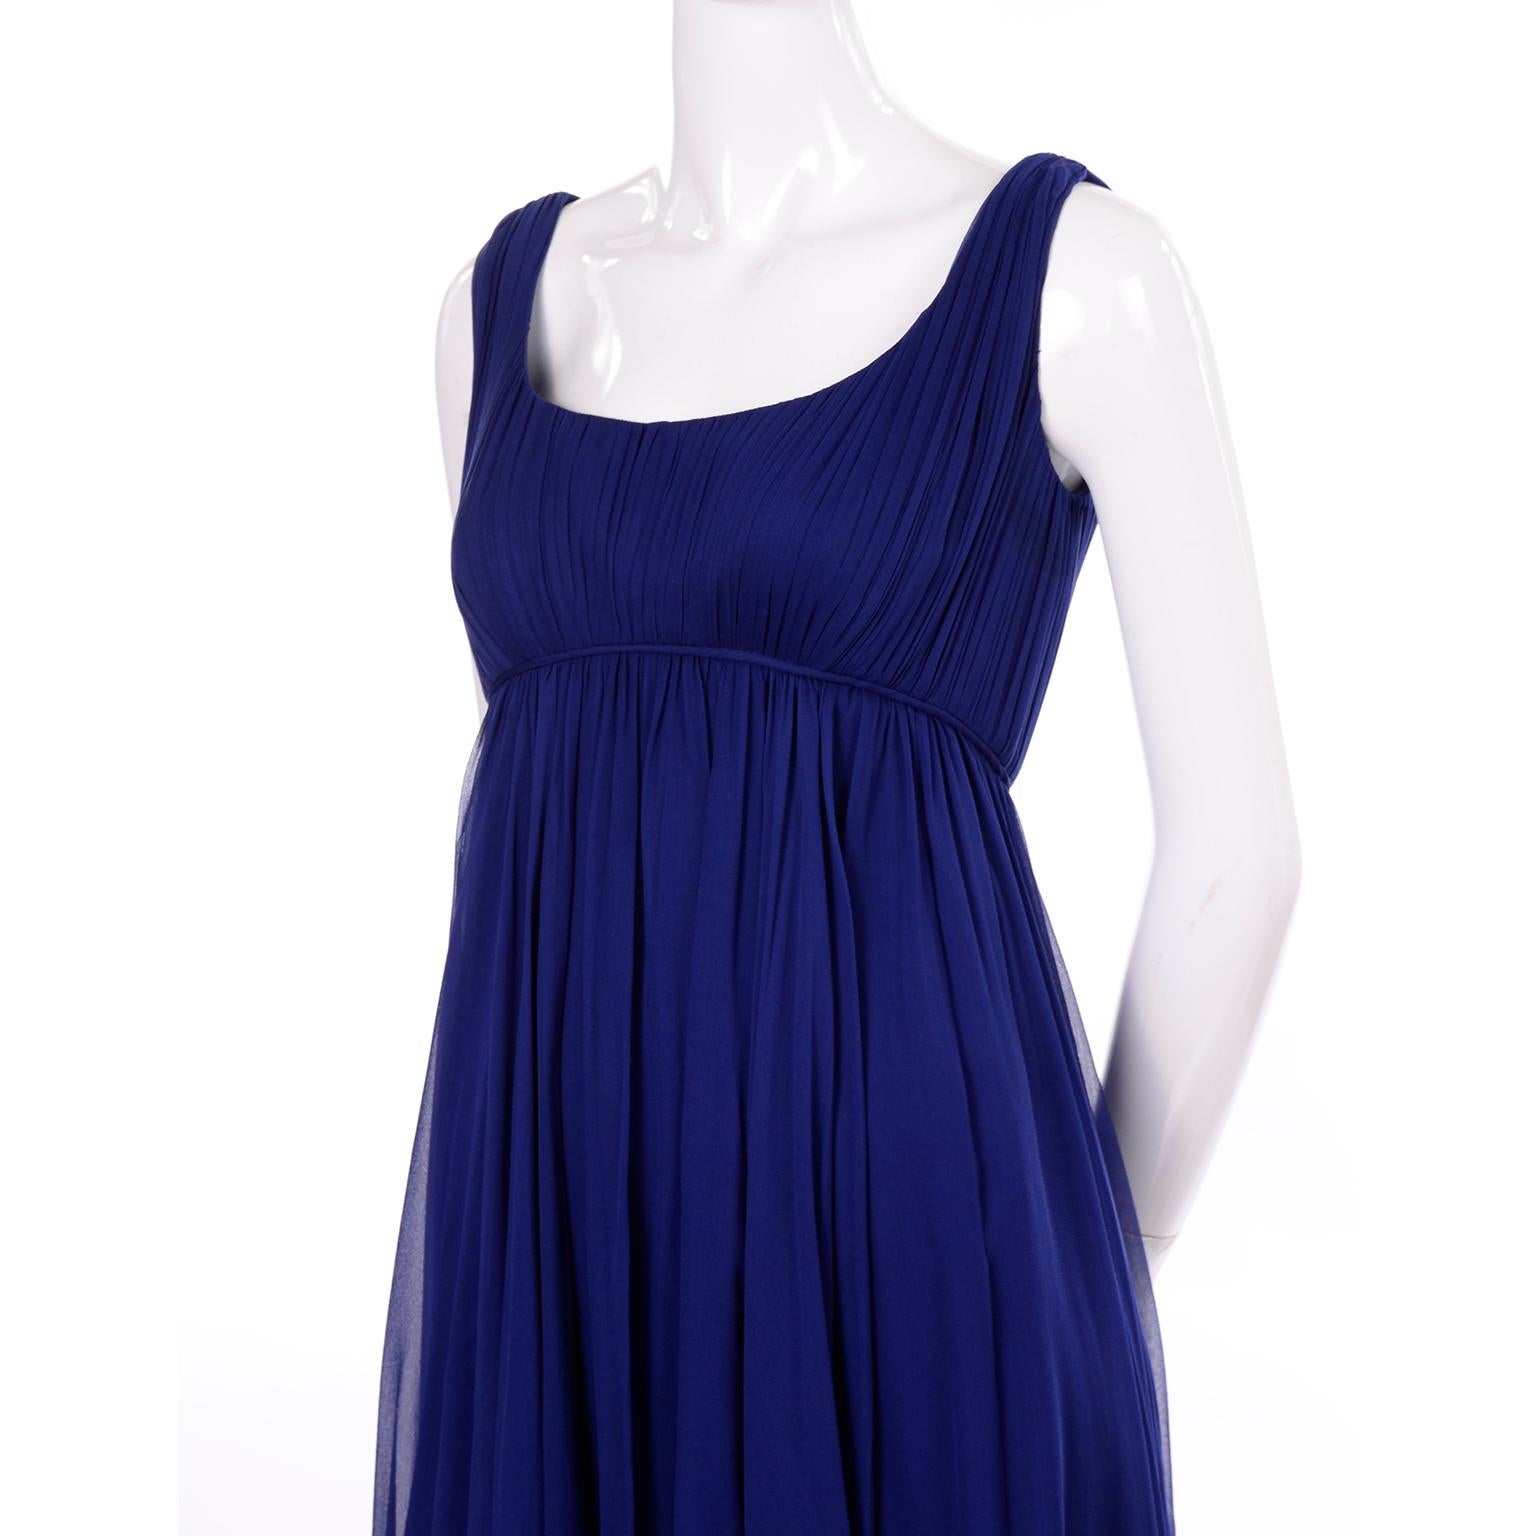 This is a lovely vintage dress designed by Malcolm Starr in the 1960's. The dress is in a beautiful shade of blue silk chiffon and has a low back and empire waist. Malcolm Starr's designs were worn by prominent women in the 1960's and 1970's.  His